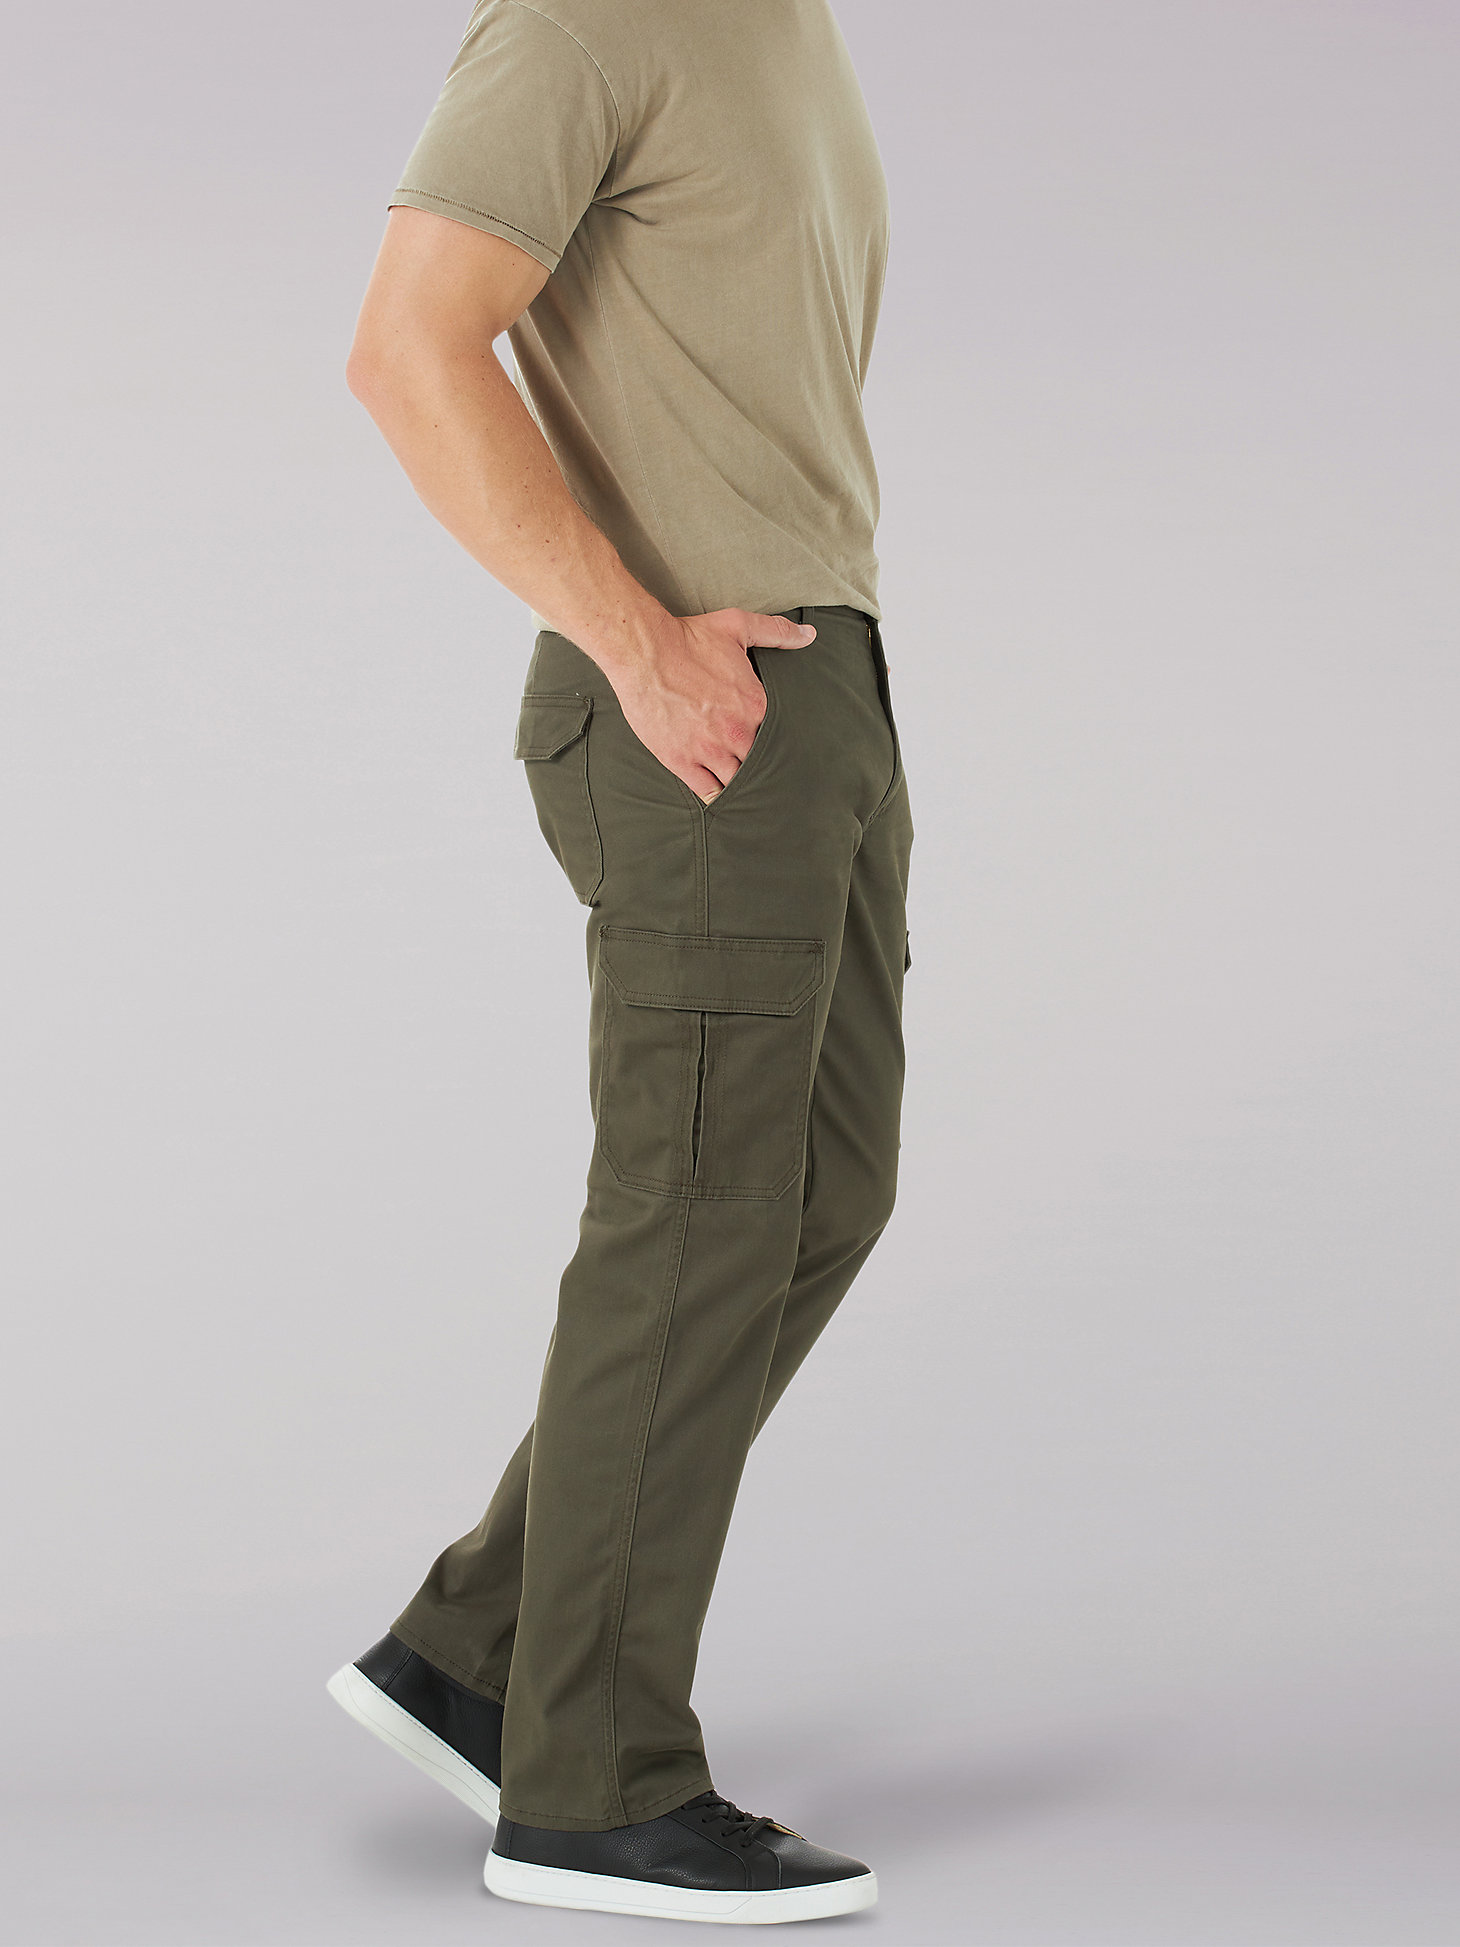 Men's MVP Straight Fit Cargo Pant in Forest alternative view 2